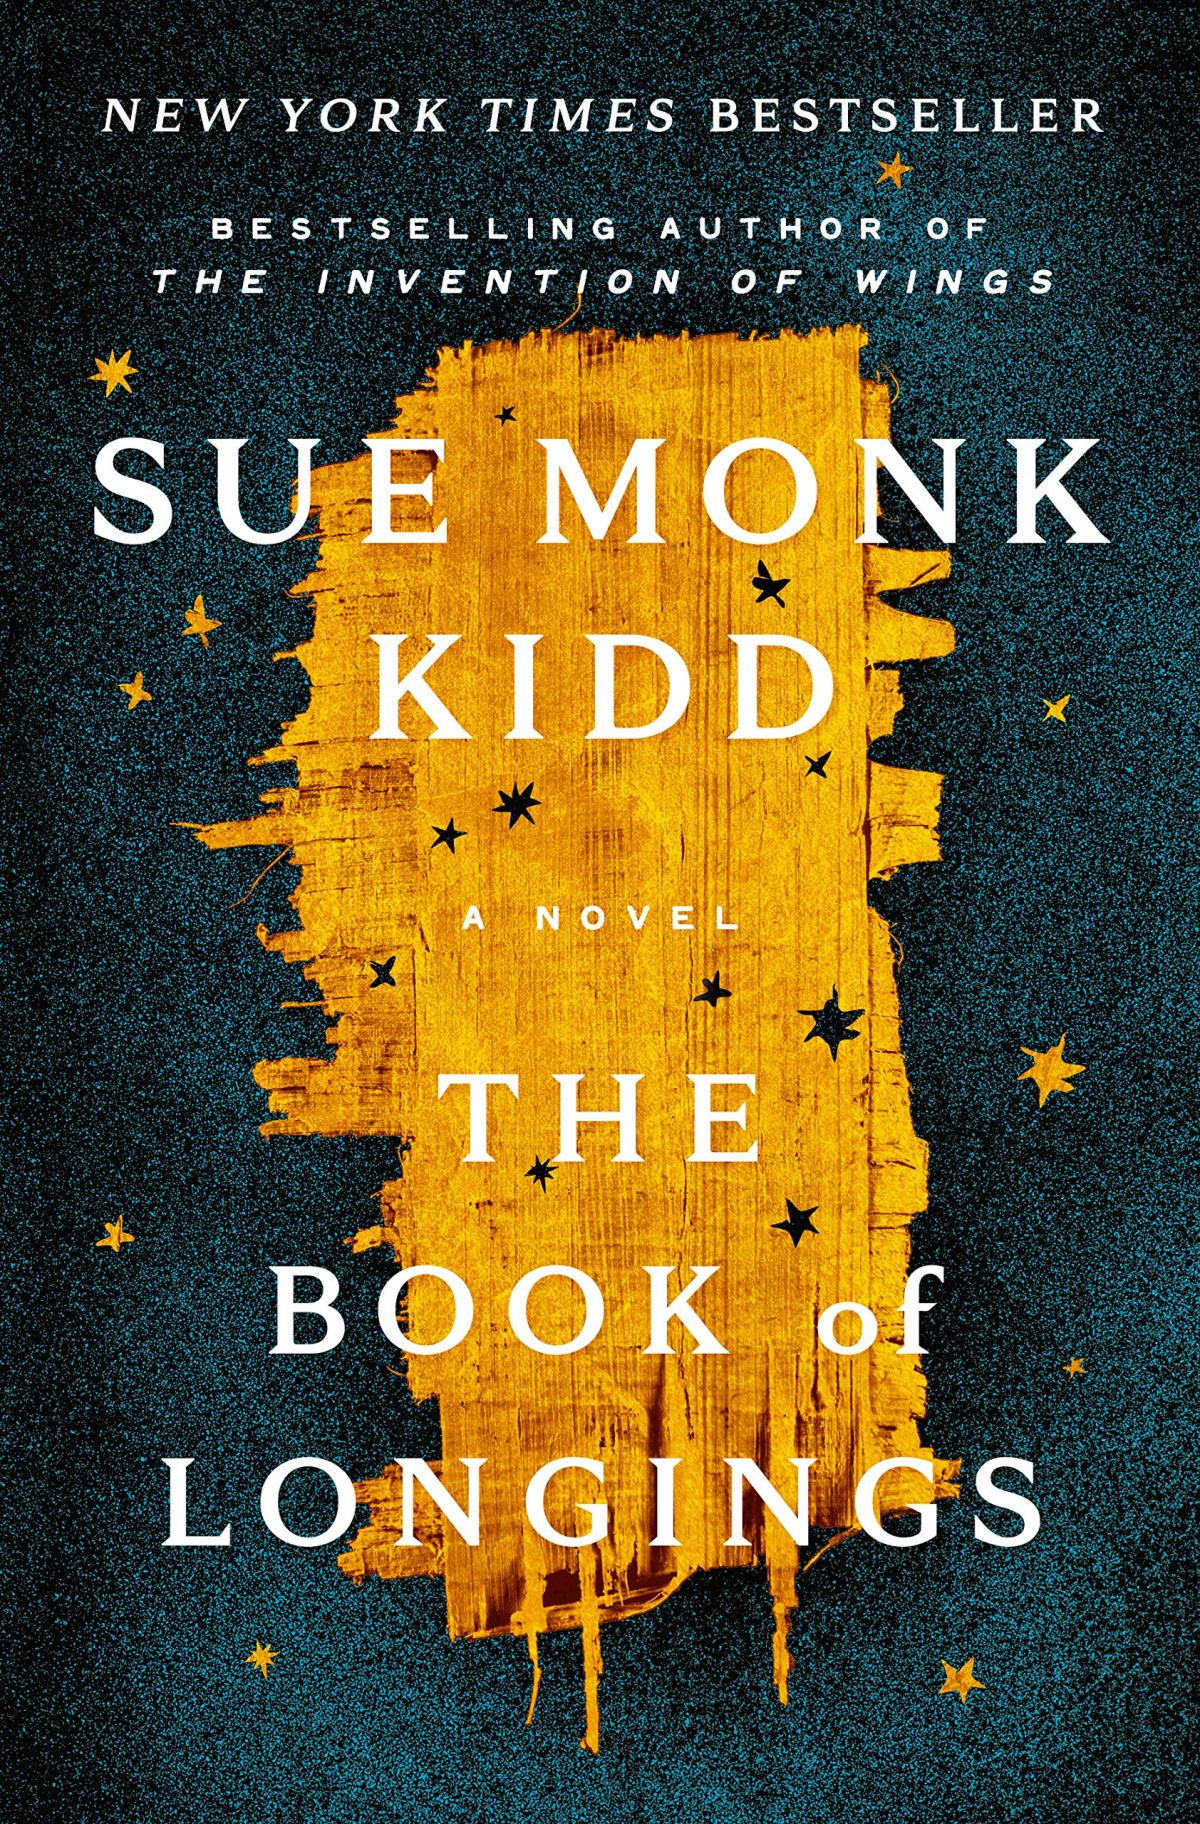 Book 26 – The Book of Longings by Sue Monk Kidd